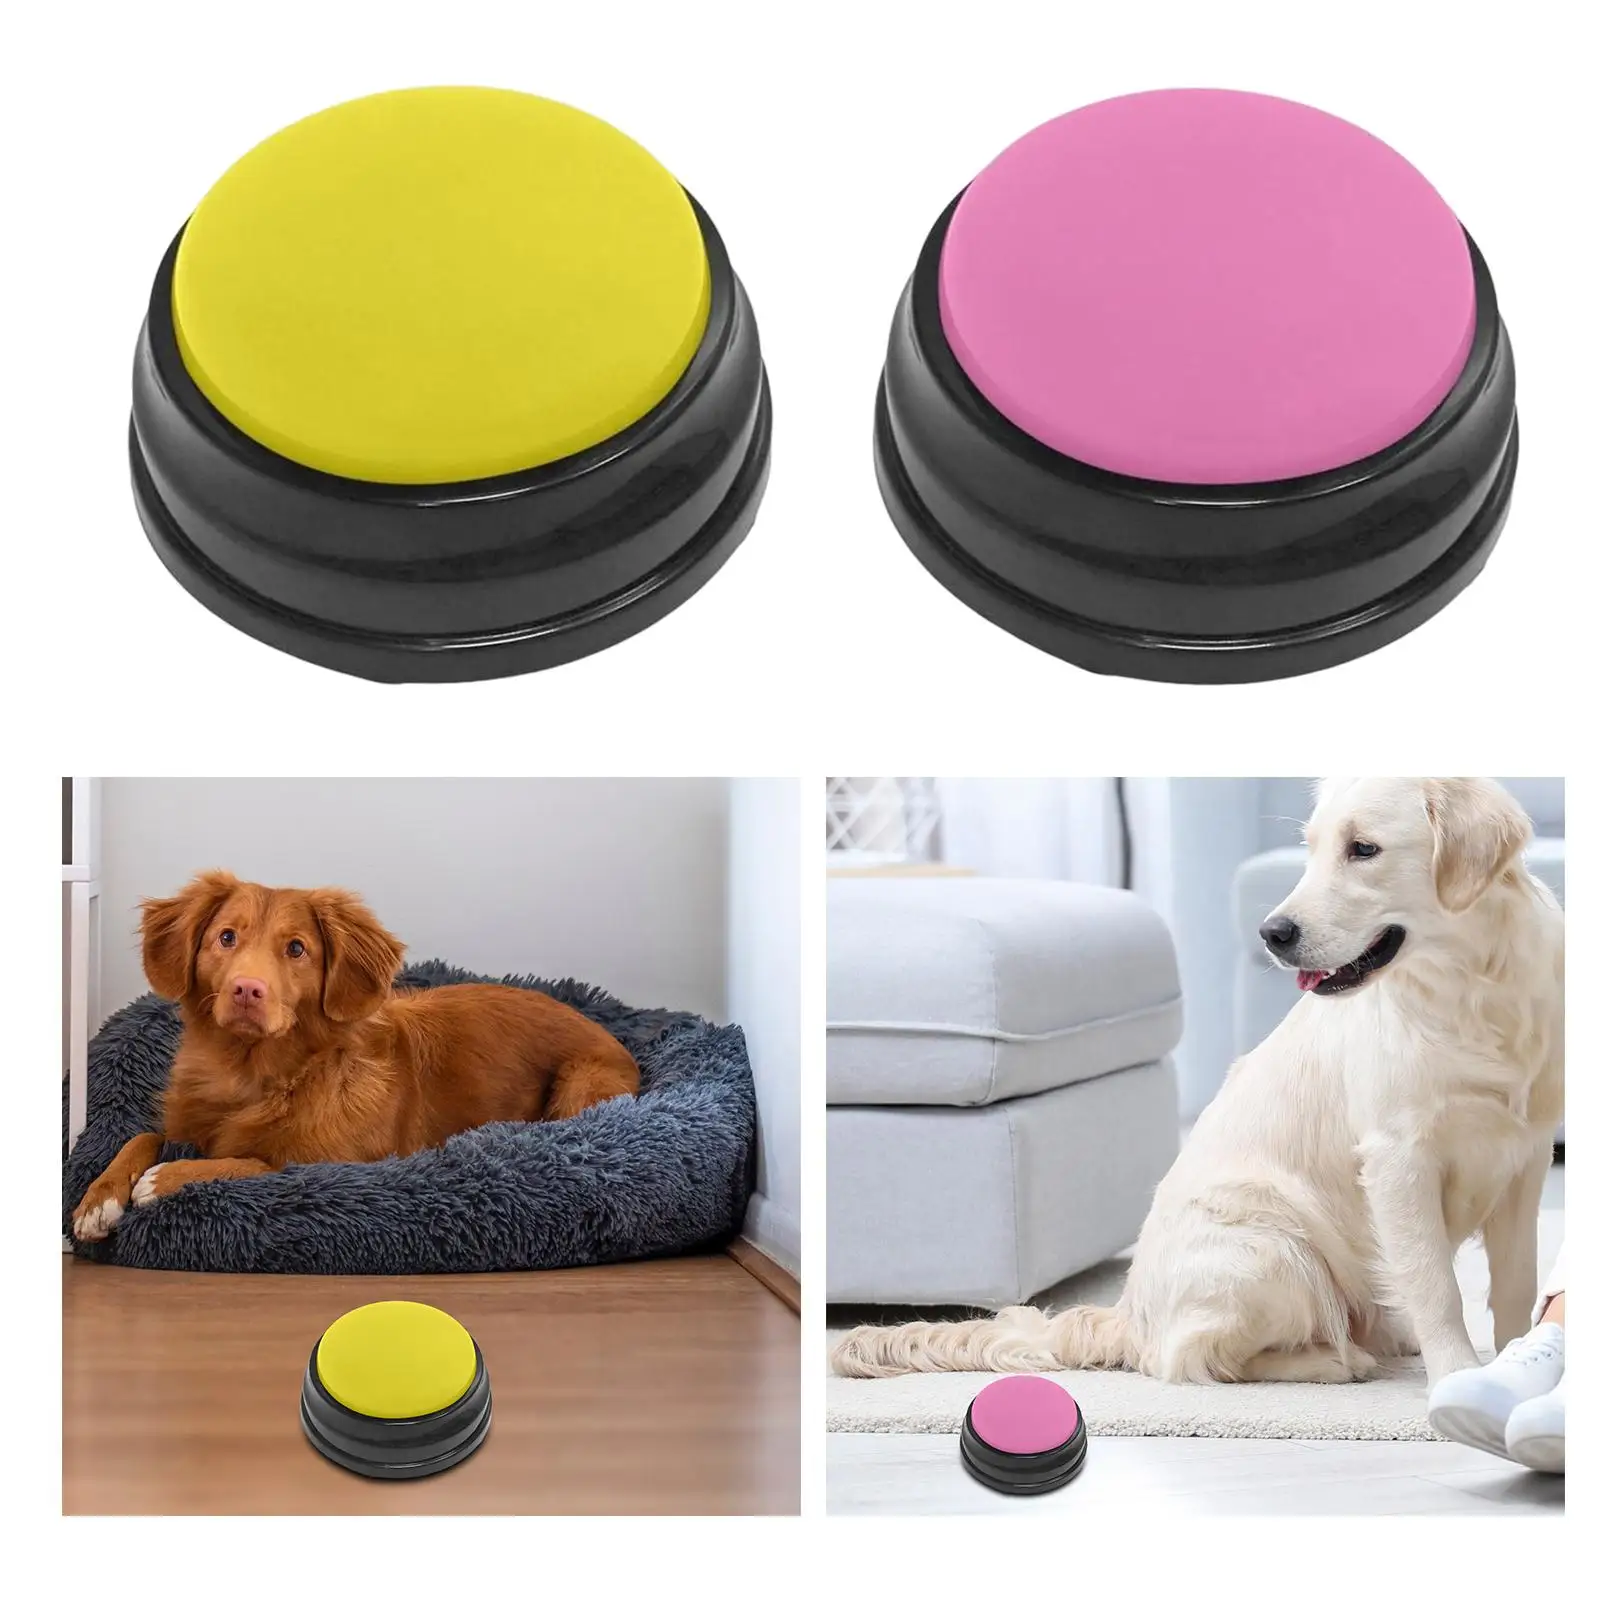 2Pcs Recordable Sound Buttons Kitten Cat Dog Interactive Toys Kids Learning